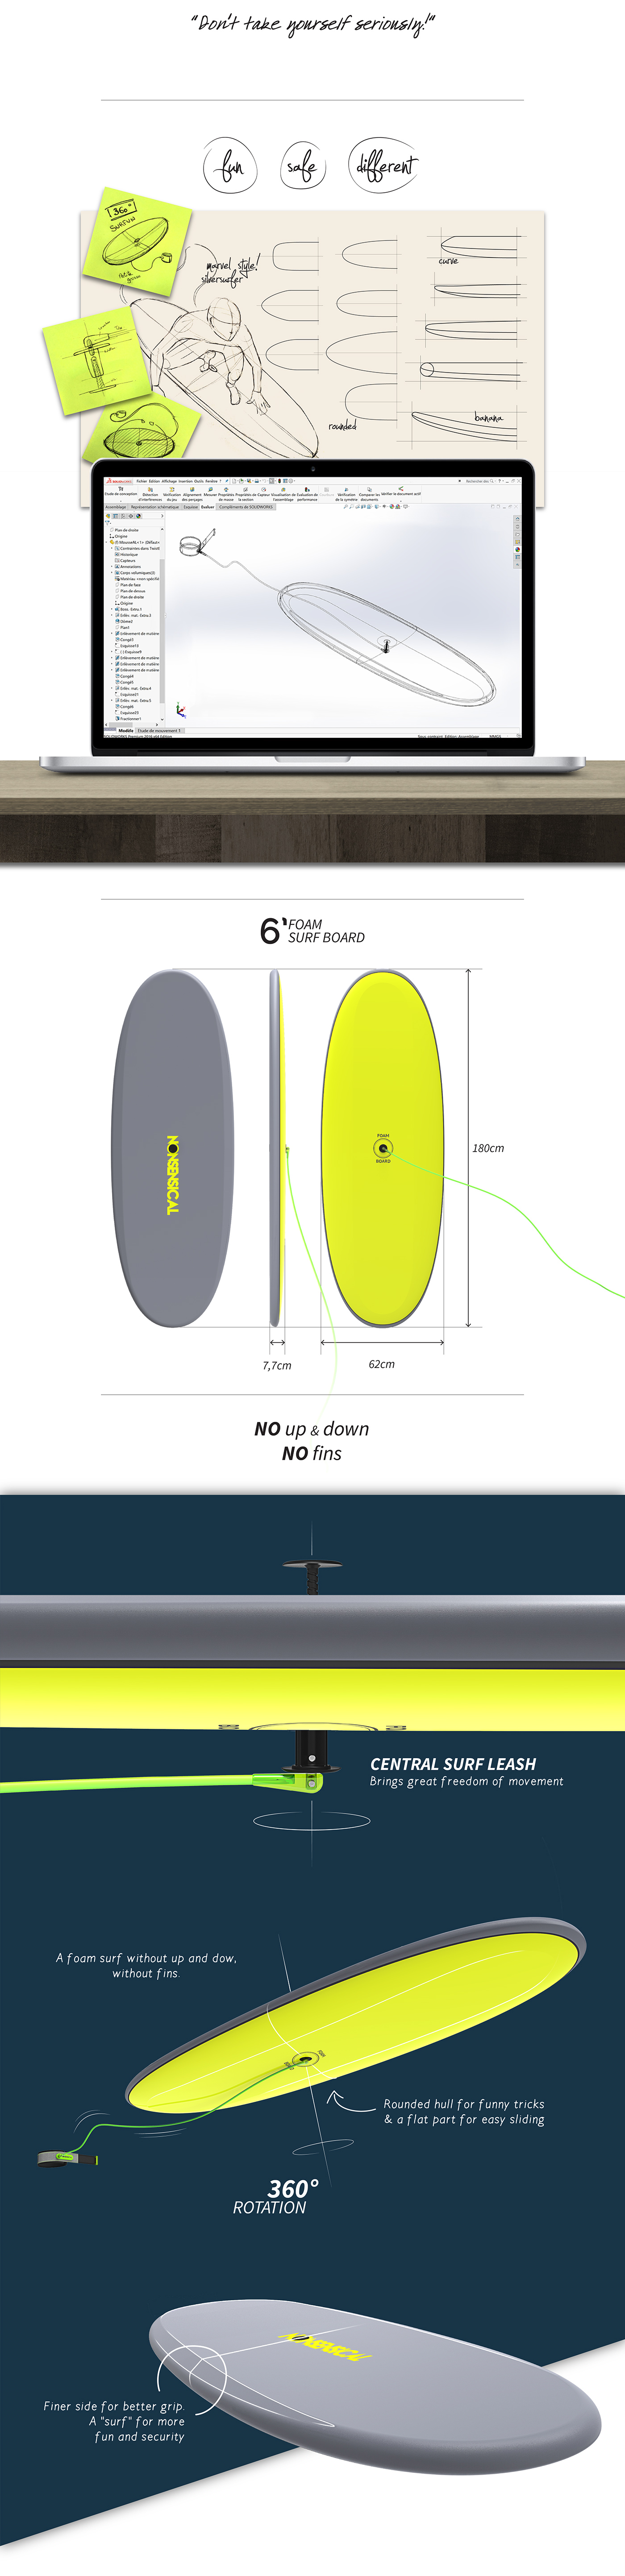 Surf surfing design product water surfboard Foam innovation concept sea